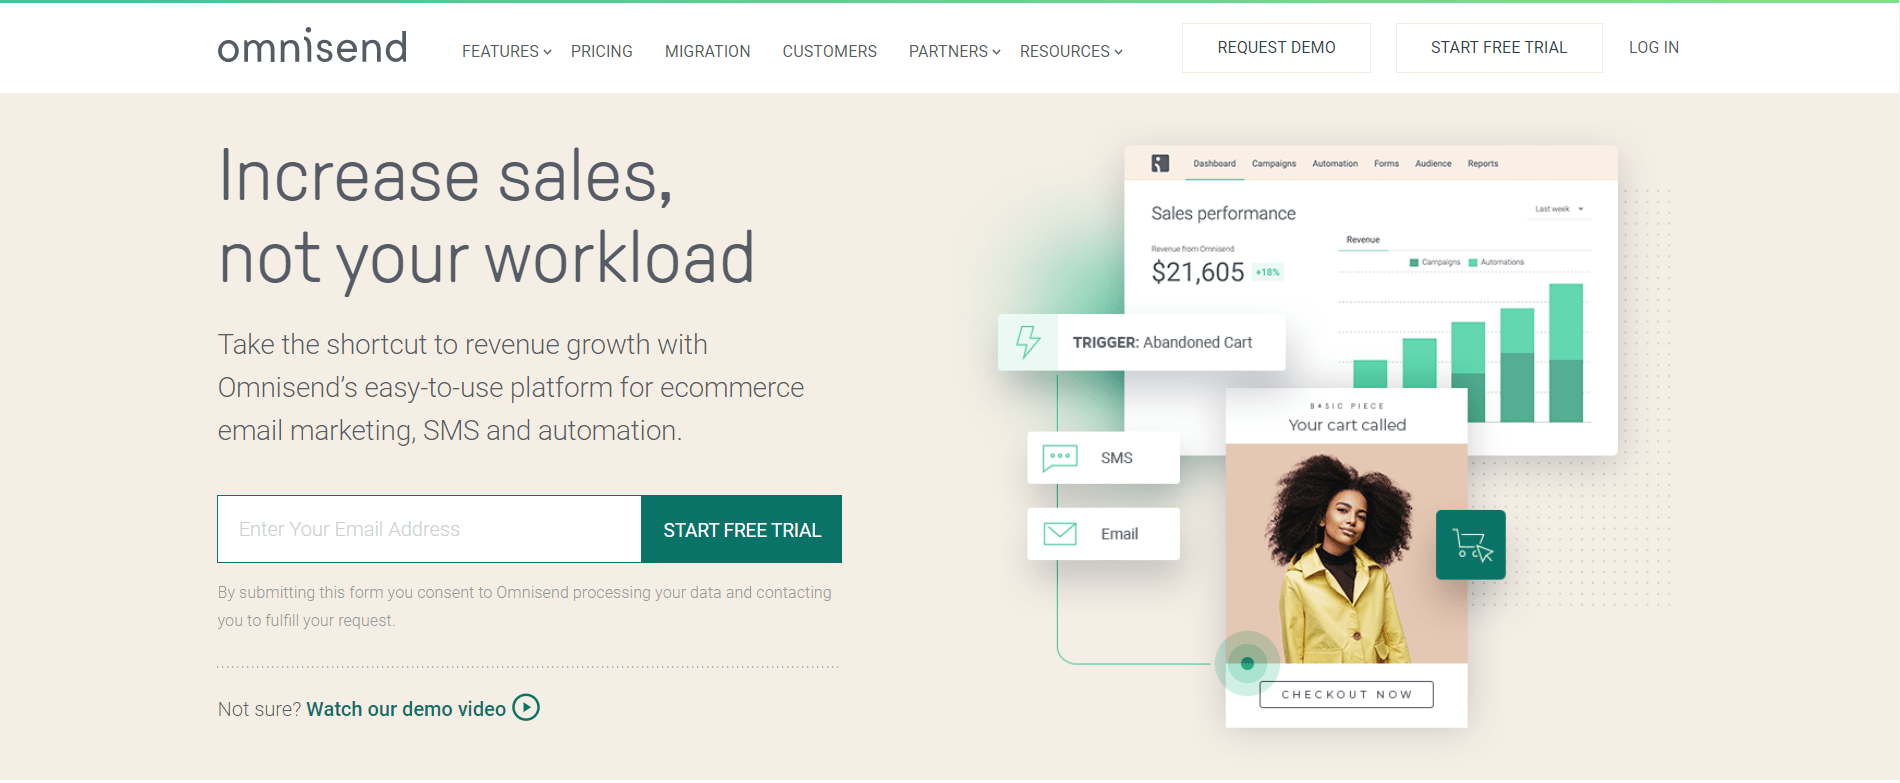 omnisend - Email Marketing Automation Tools